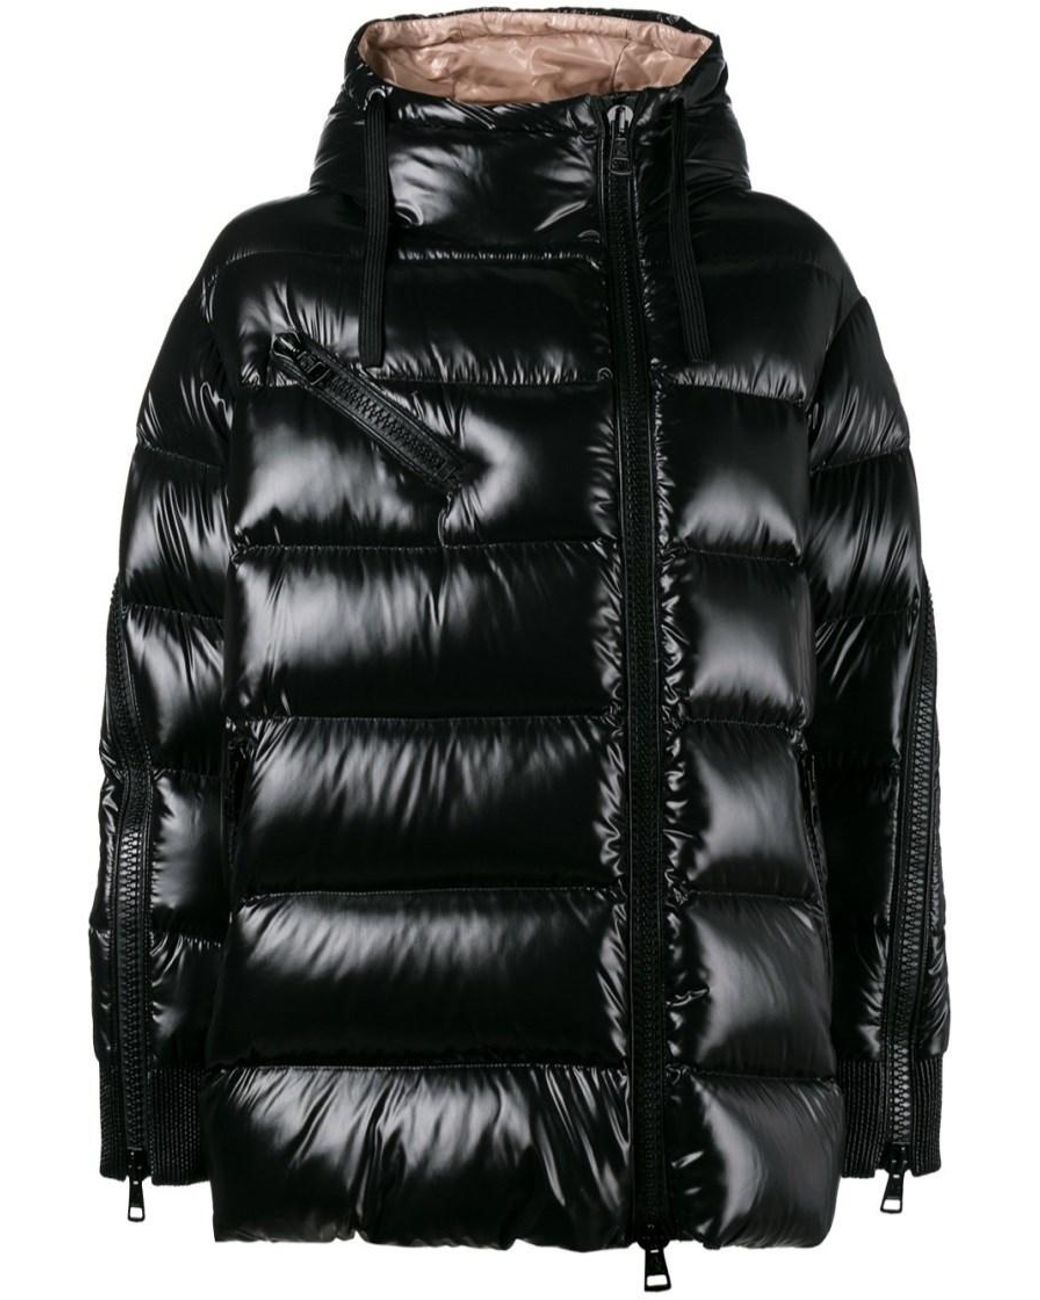 Moncler Oversized Puffer Jacket in Black | Lyst